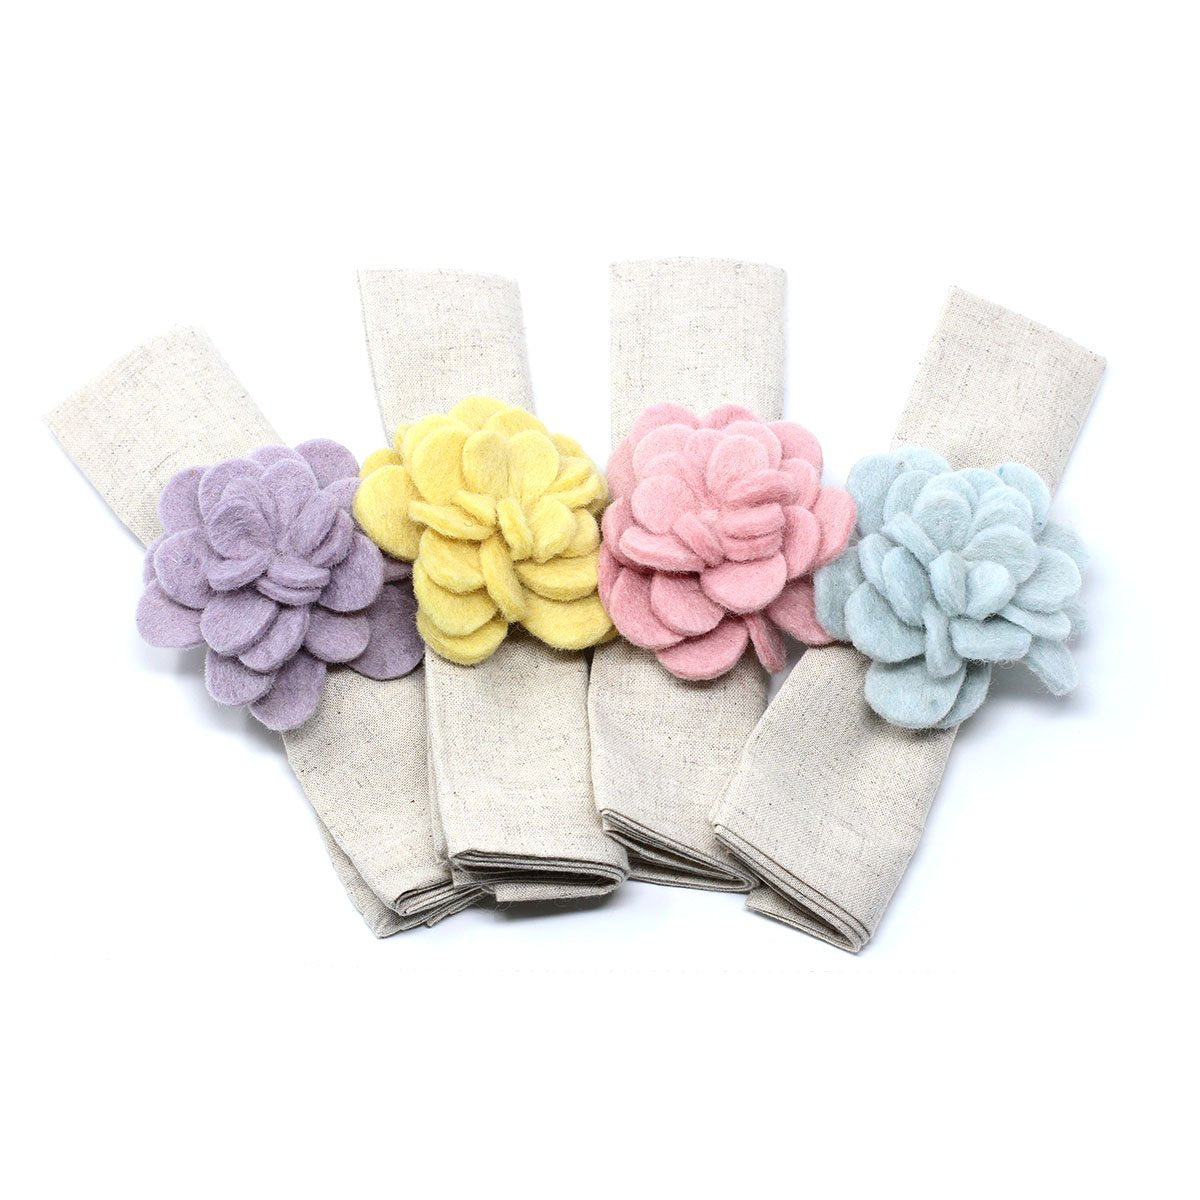 Hand-felted Zinnia Napkin Rings, Set of Four Colors - Linda Kay Gifford’s - Those Nasty Women TALK! by SWEETSurvivor